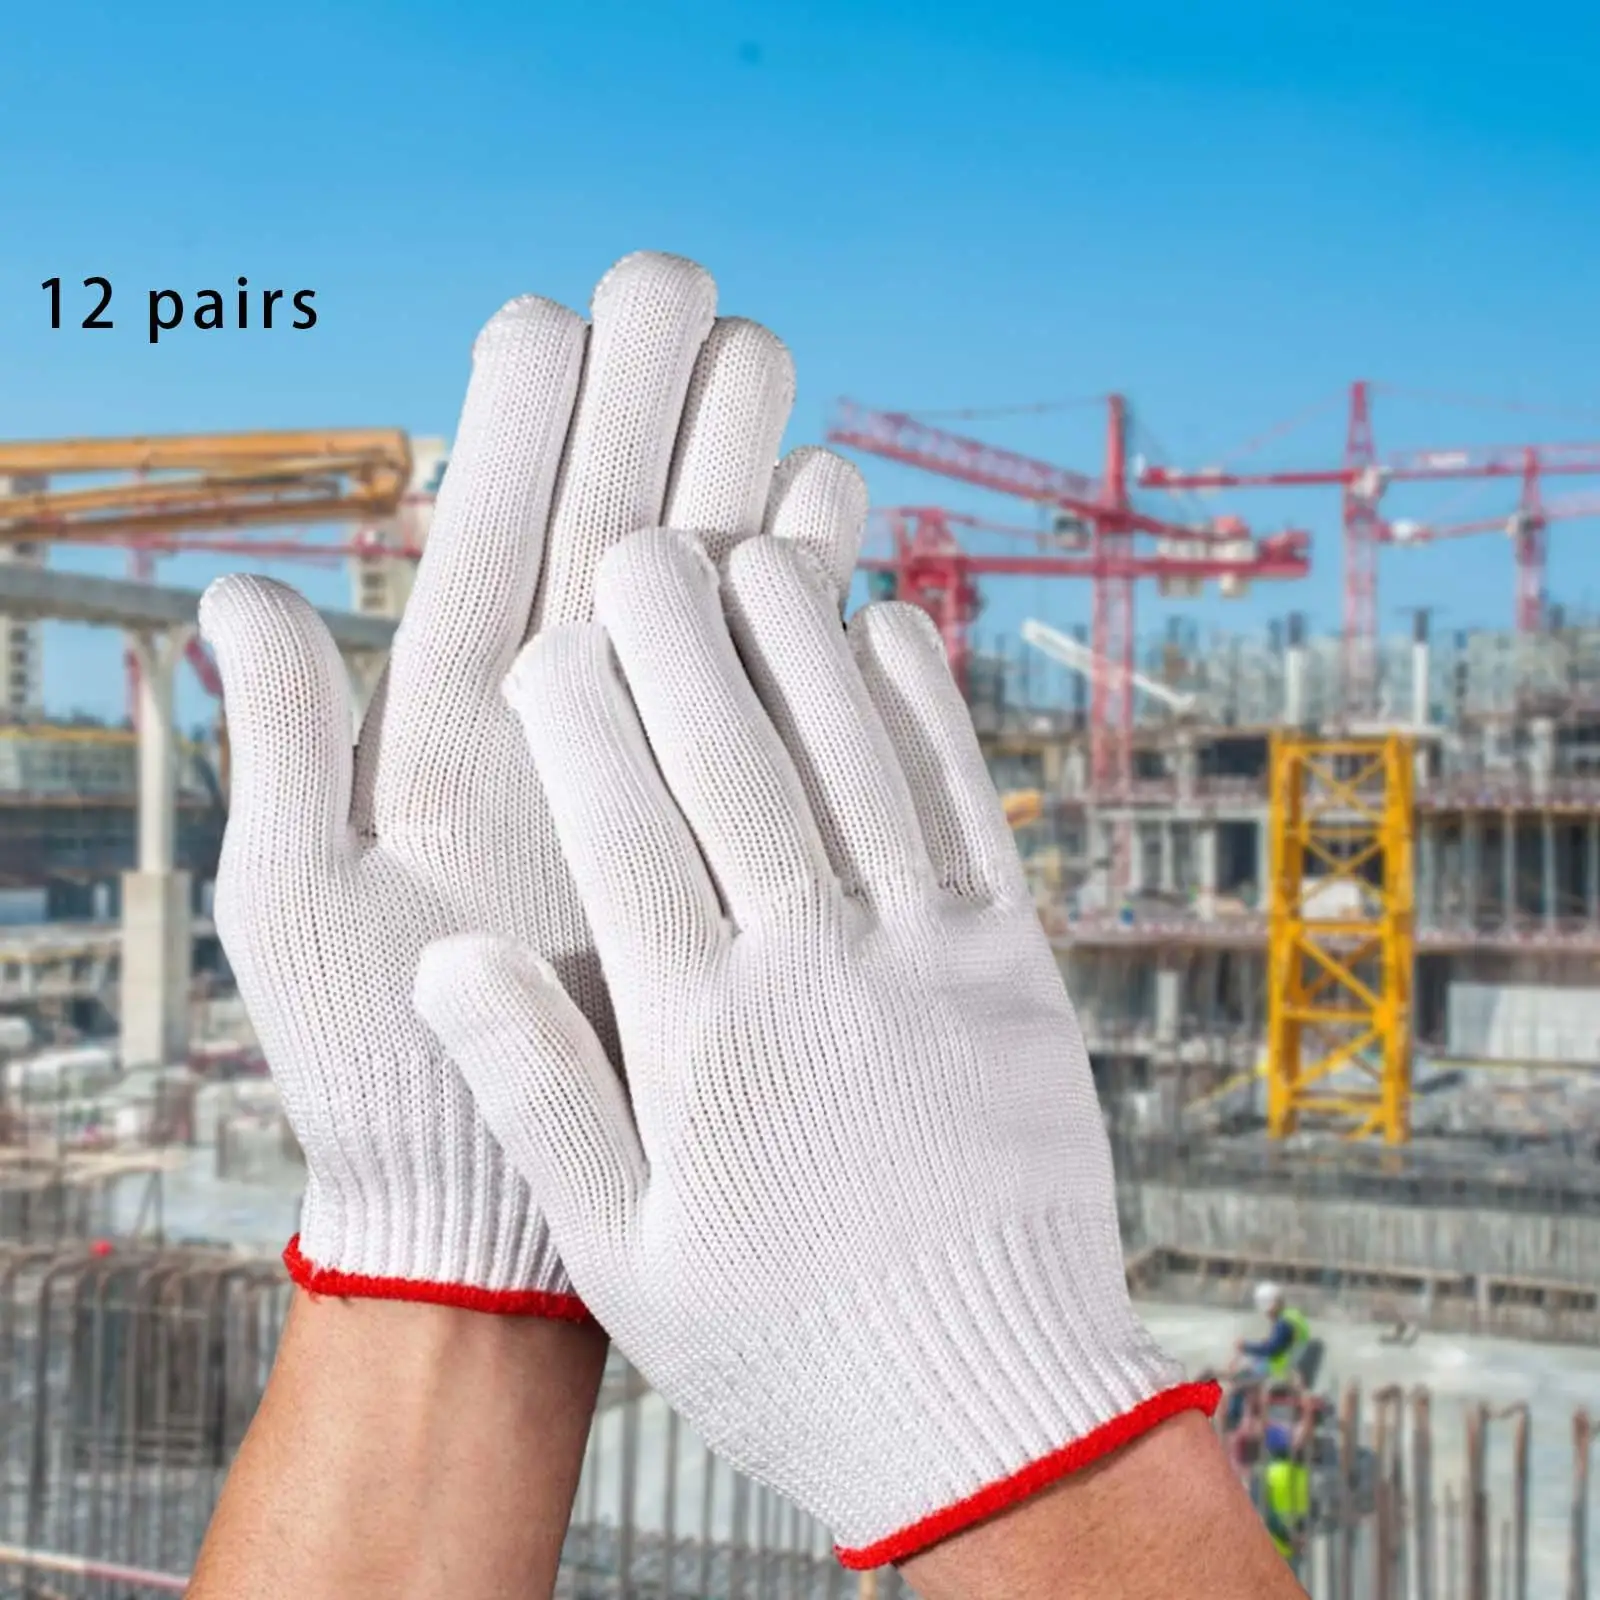 12 Pairs Cotton Work Gloves Cotton Labor Protection Gloves for Construction Fishing Gardening Winter Indoor Outdoor Use Utility